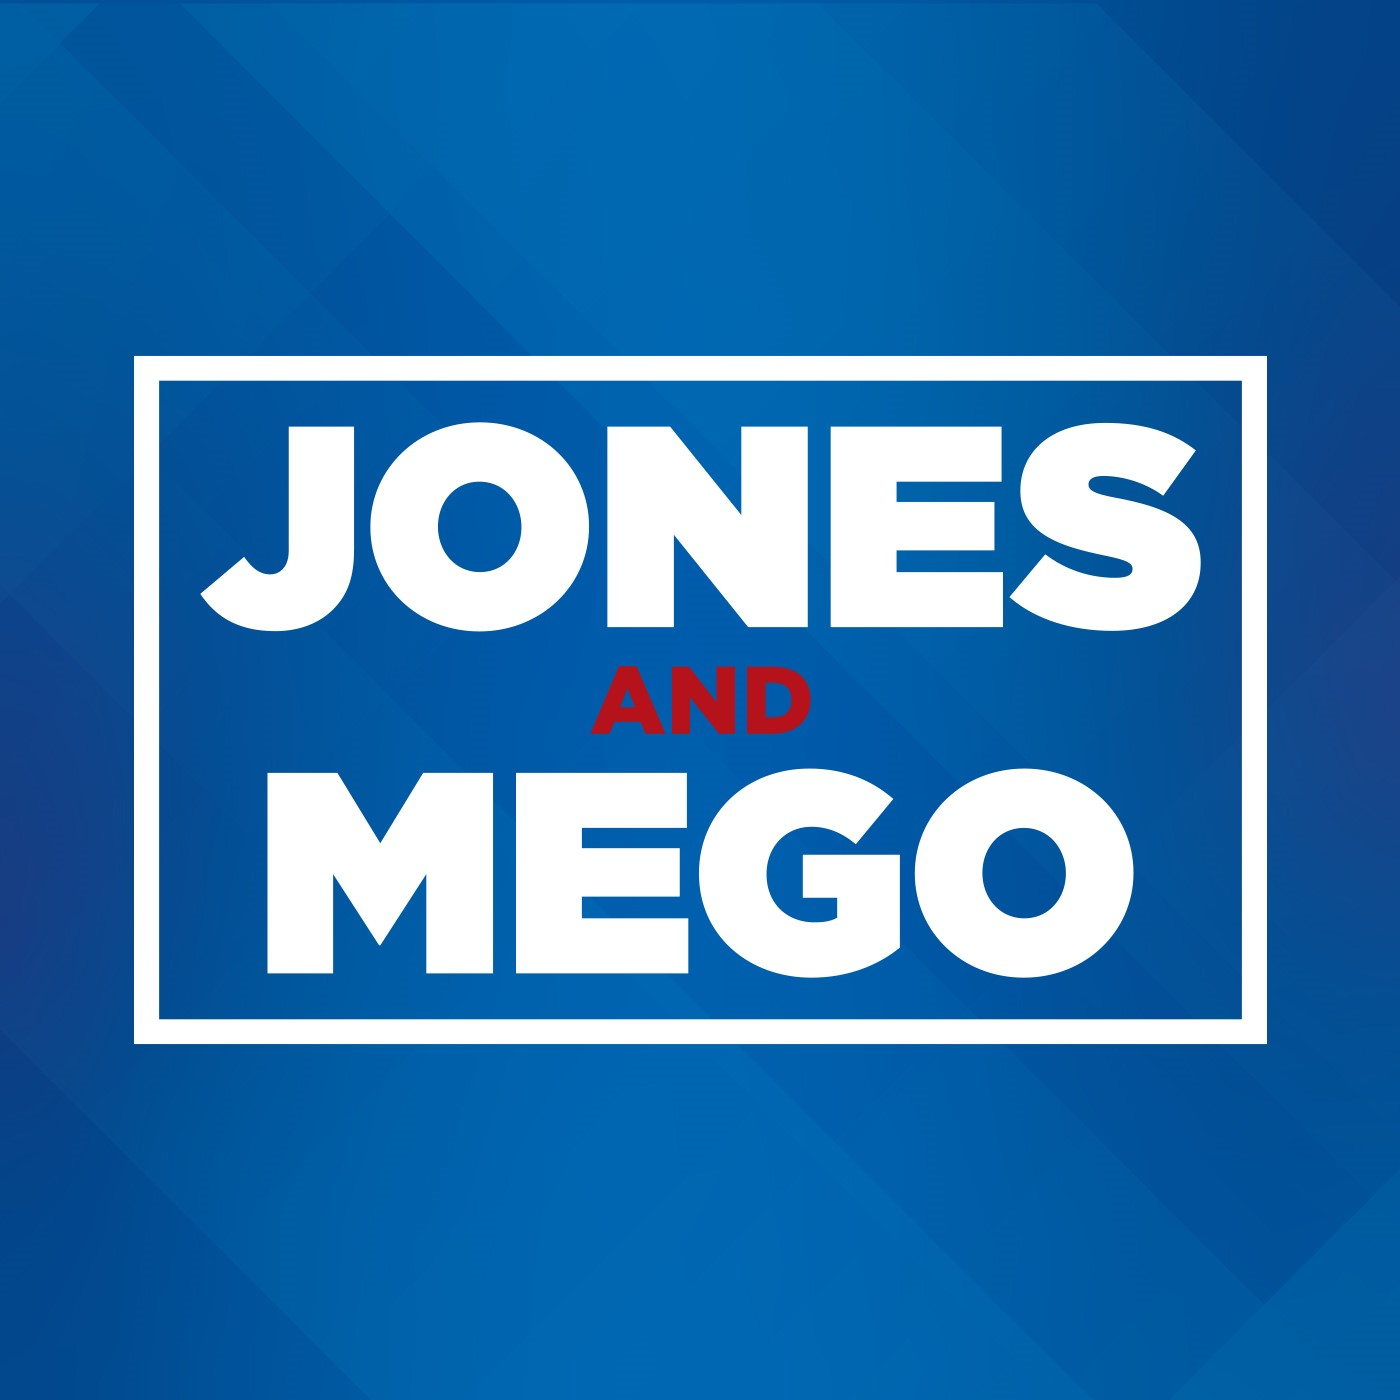 Jones and Mego are joined by Dan Orlovsky